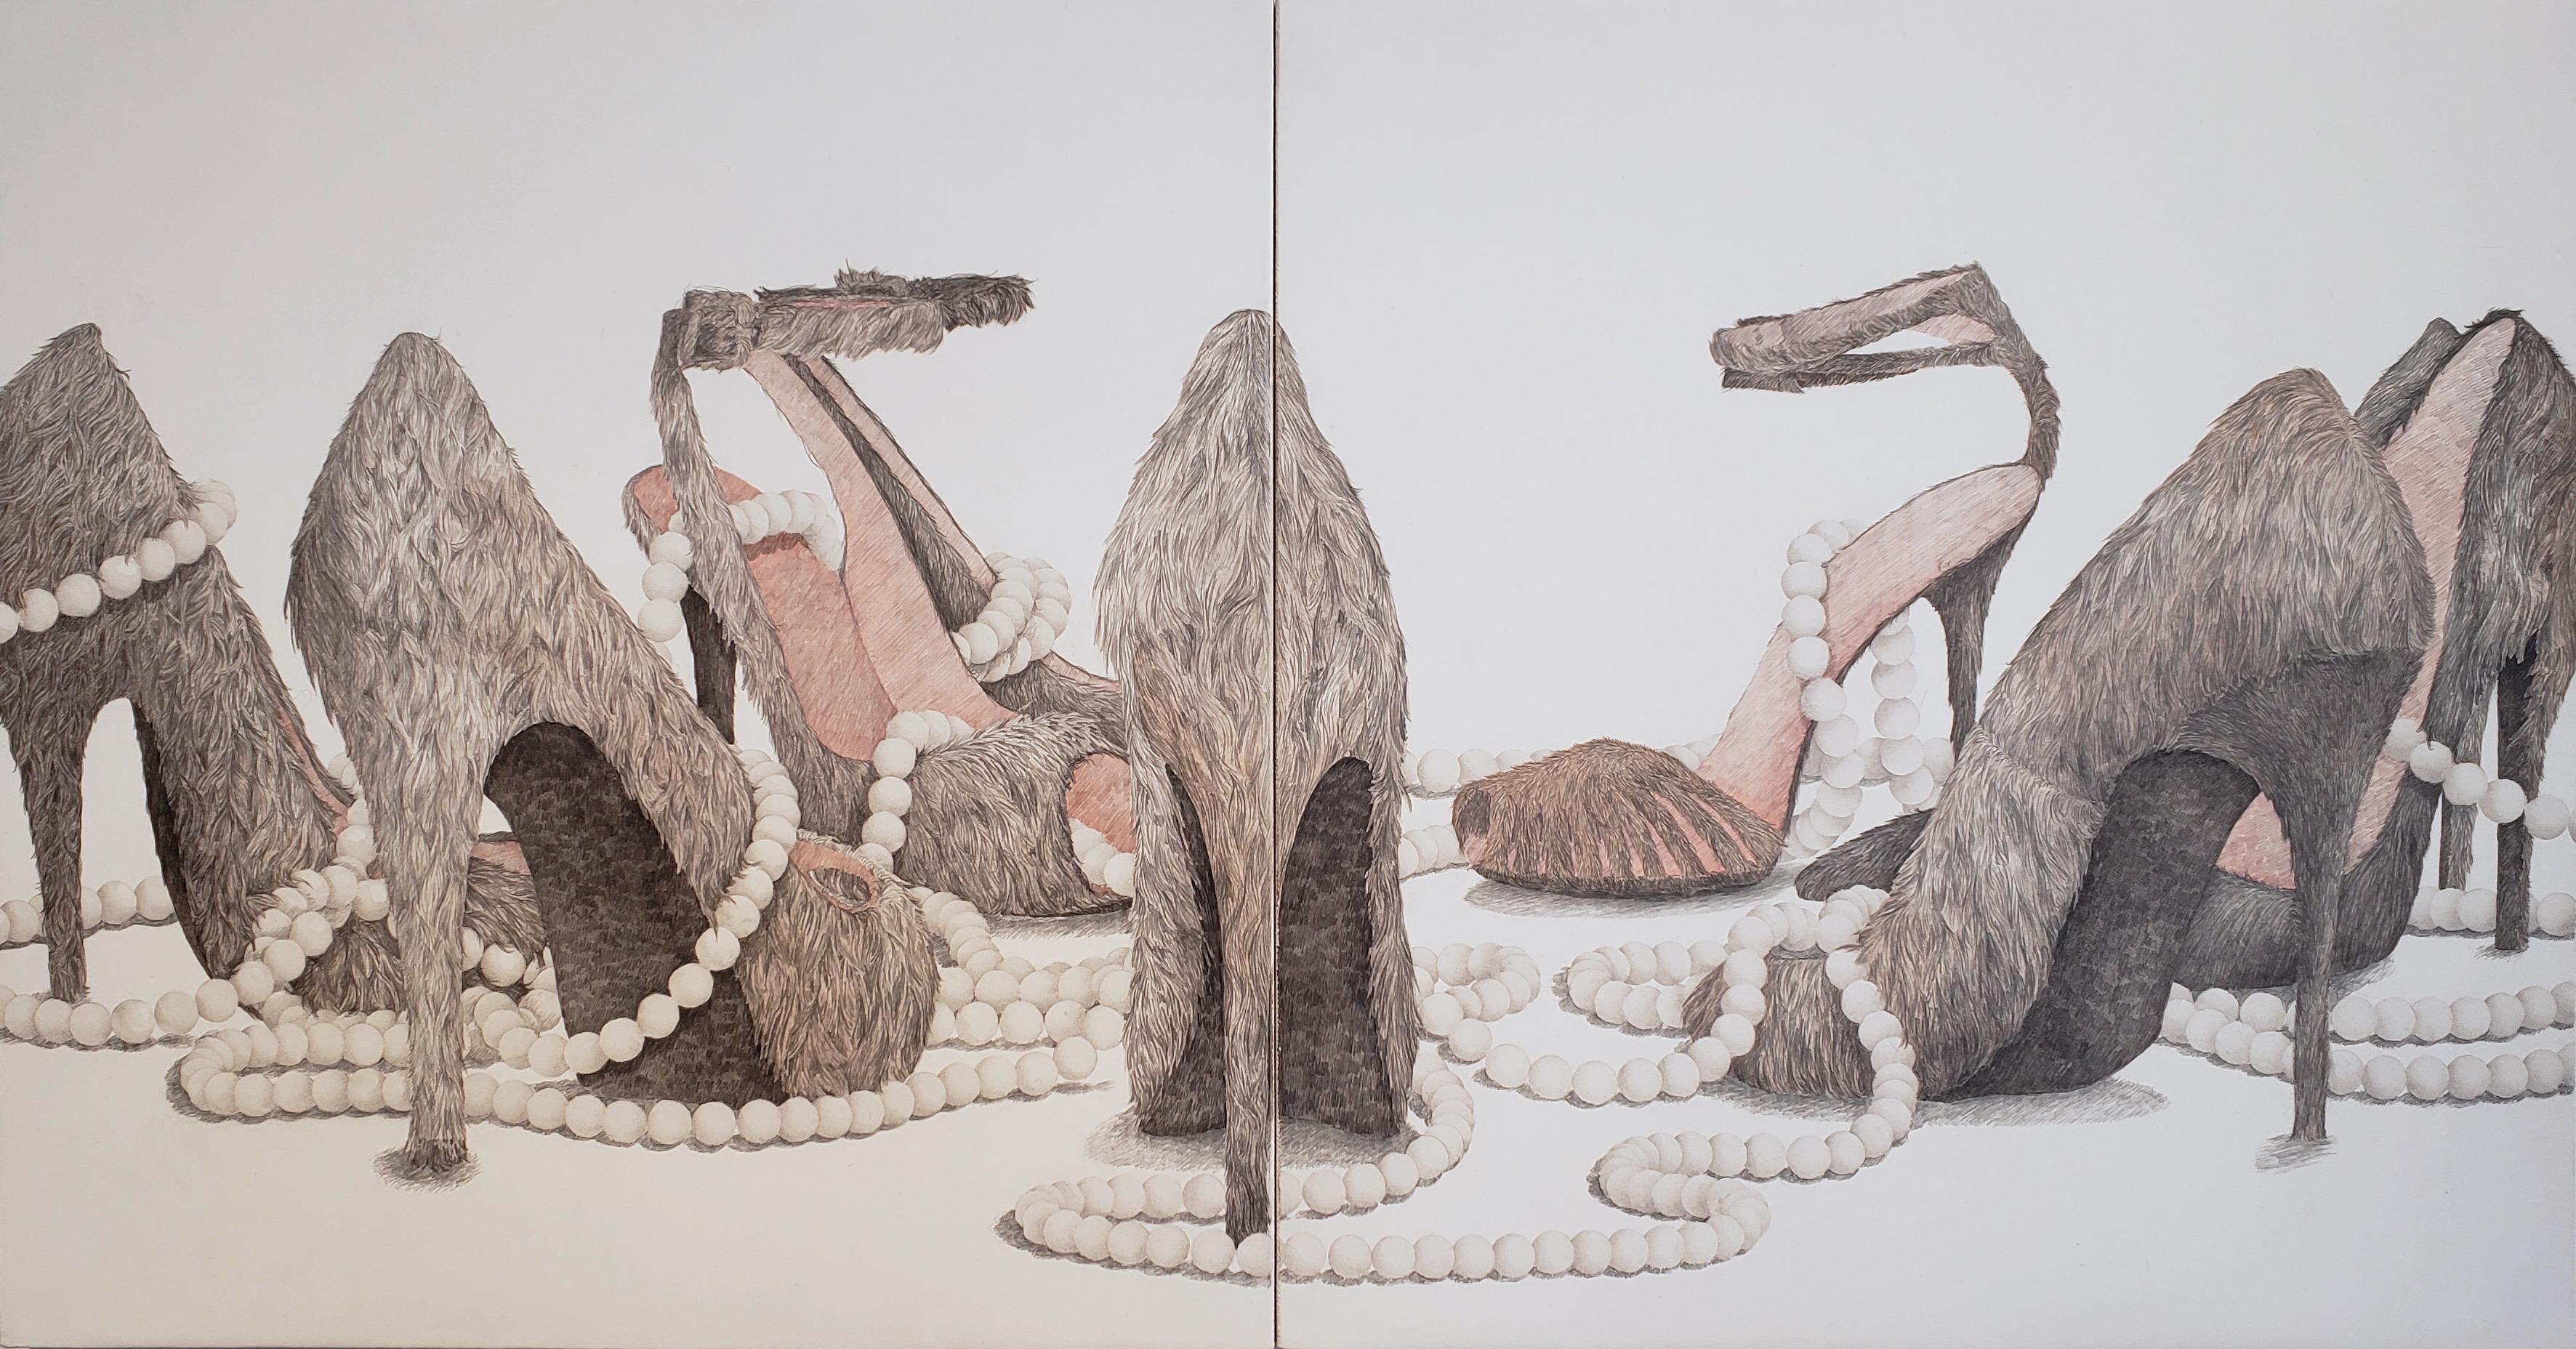 Greg Murr combines painting and drawing in airy compositions that function as philosophical inquiries into the flux of the natural world. In "Well," Murr offers the viewer a "pack" of lethal high heels draped in luxurious white pearls. Murr